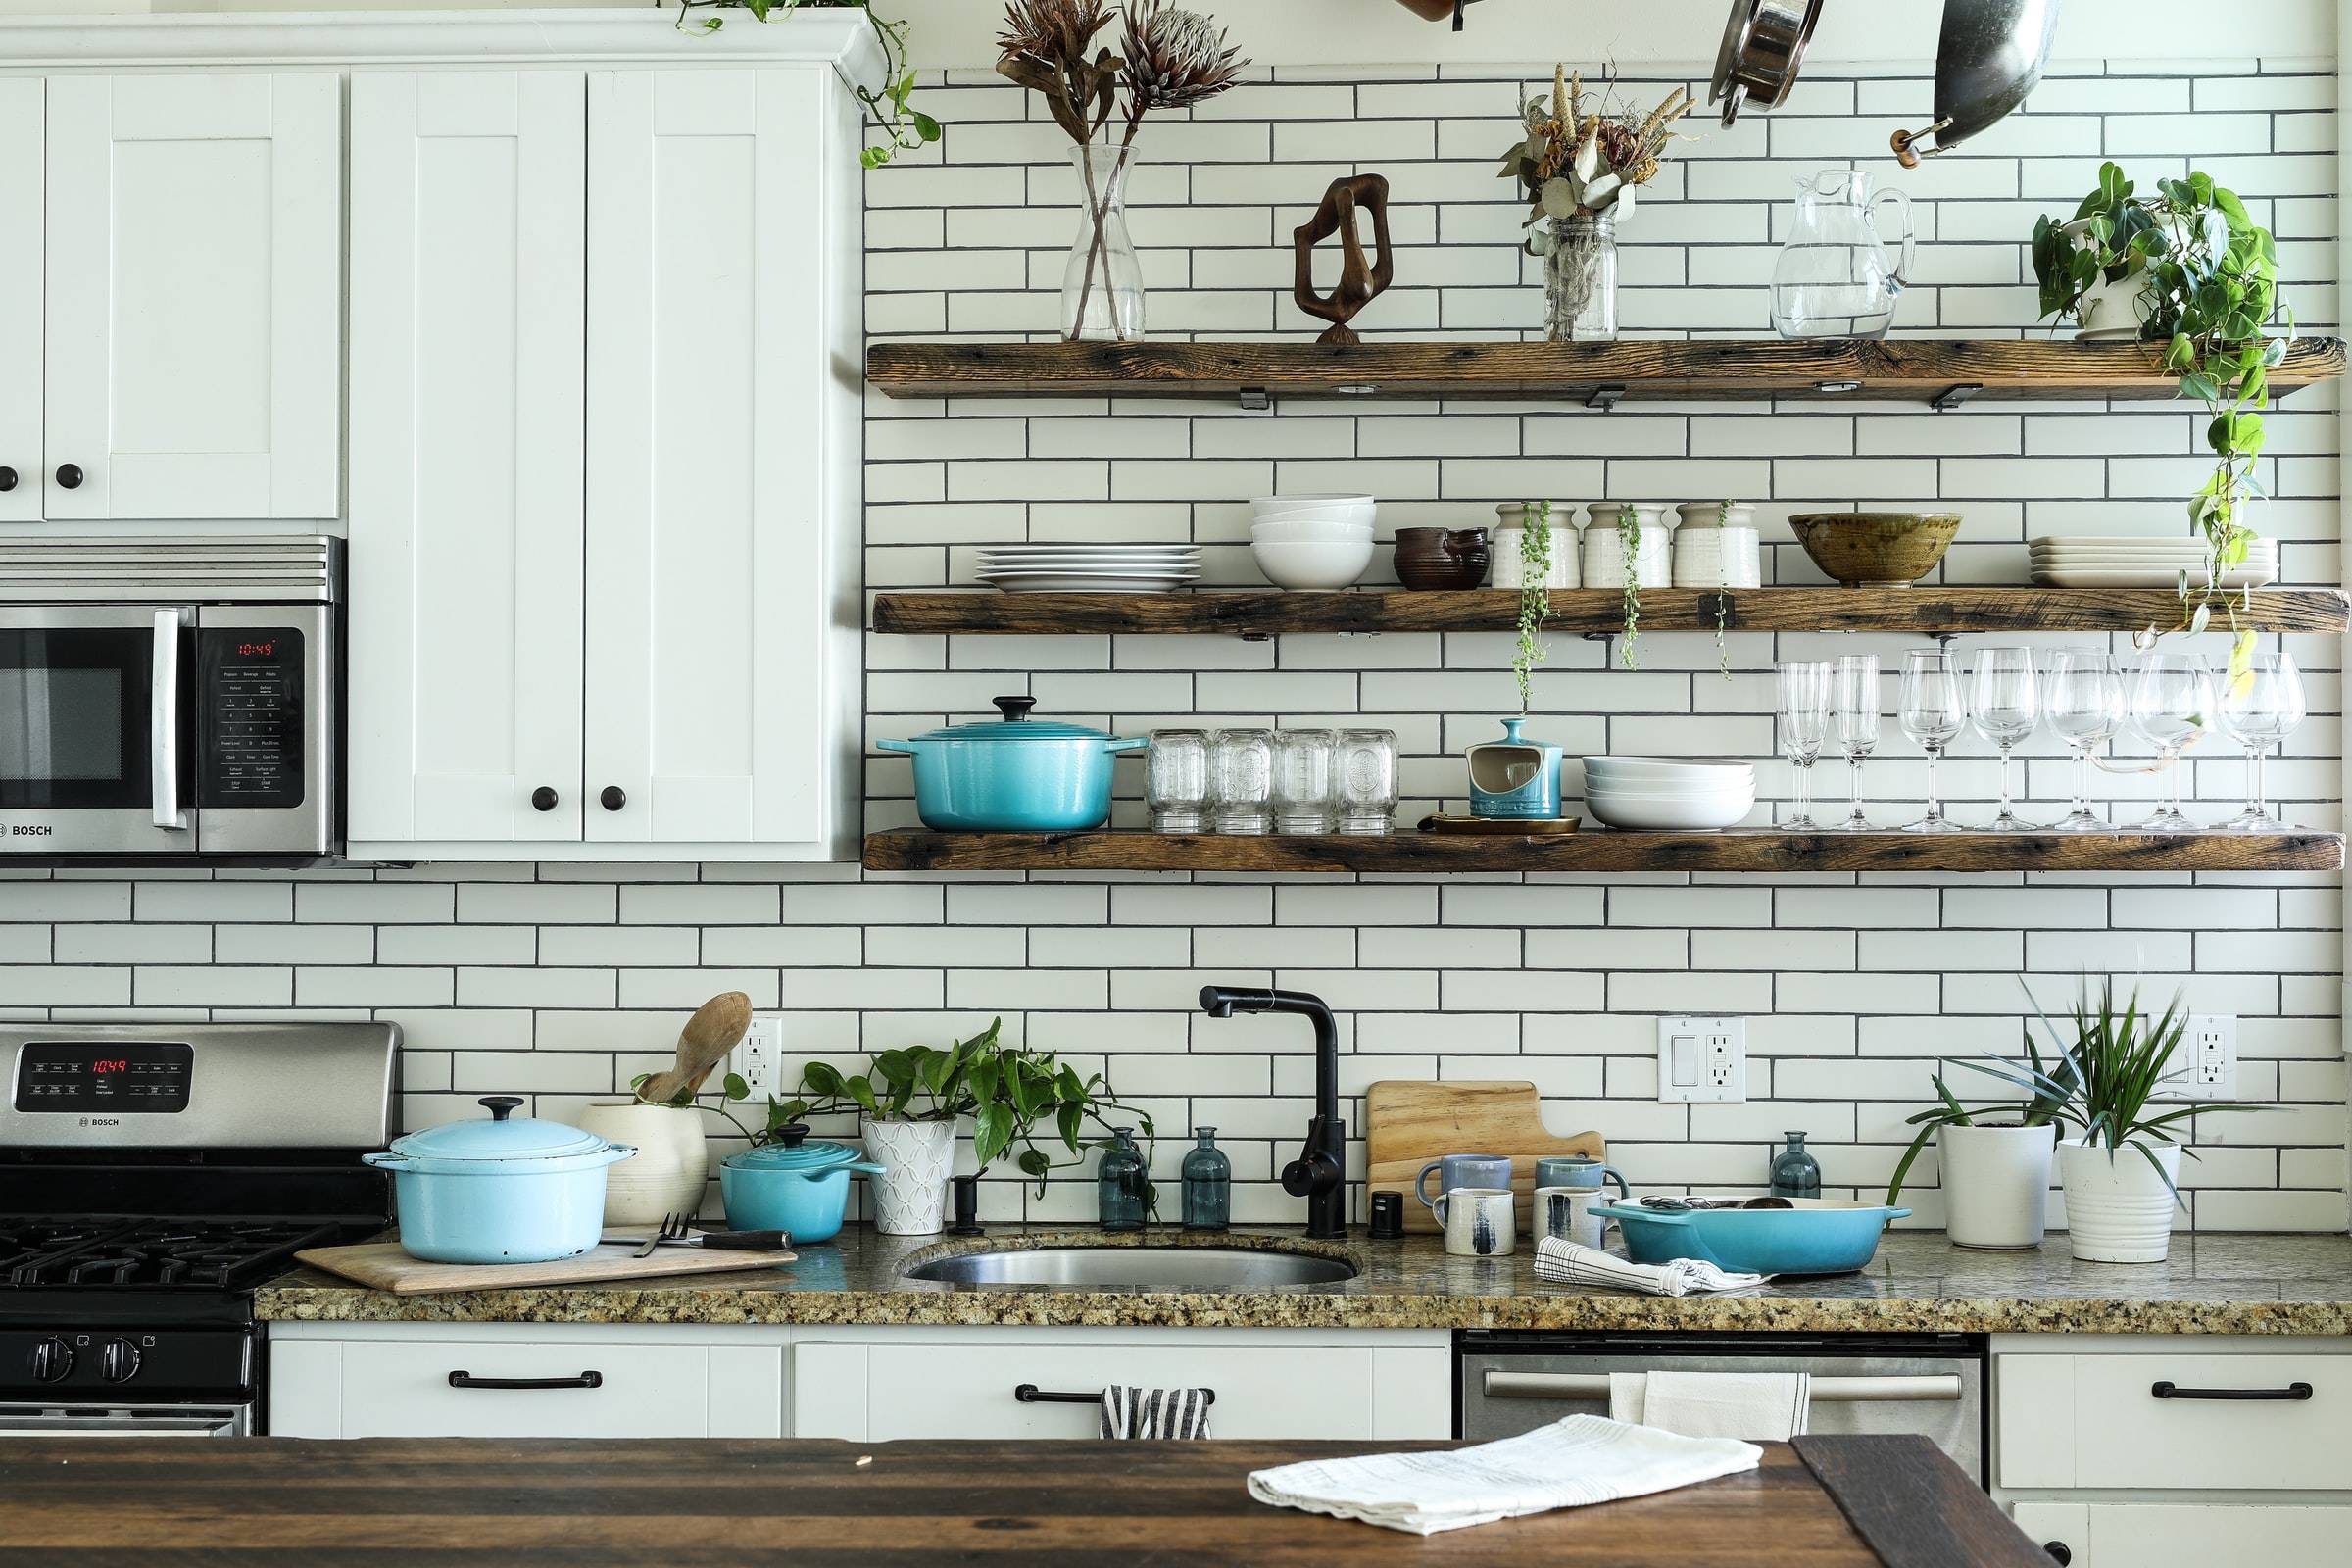 Open shelving creates a cluttered look in the kitchen (from Unsplash)